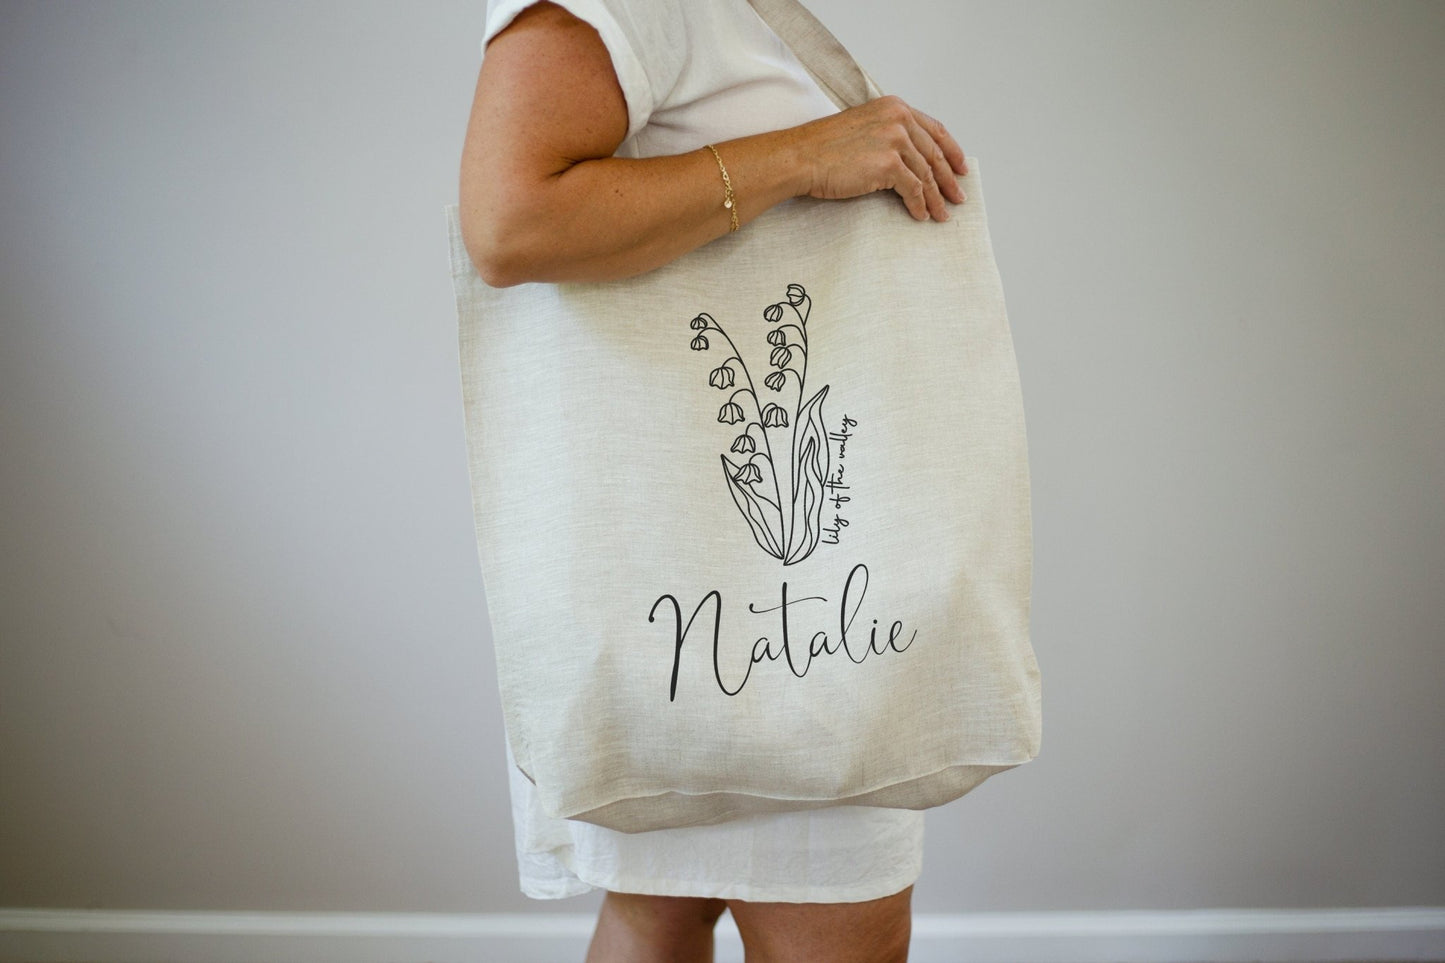 Design Initial Letter Linen Tote Bag, Personalized Present Bag,  Lightweight, Portable Letter Flower Pattern Natural Elements Linen  High-Capacity Tote Bag, Graduation Gifts Halloween Gifts Christmas Gift,  Beach Vacation Stylish Tote Bag, Suitable